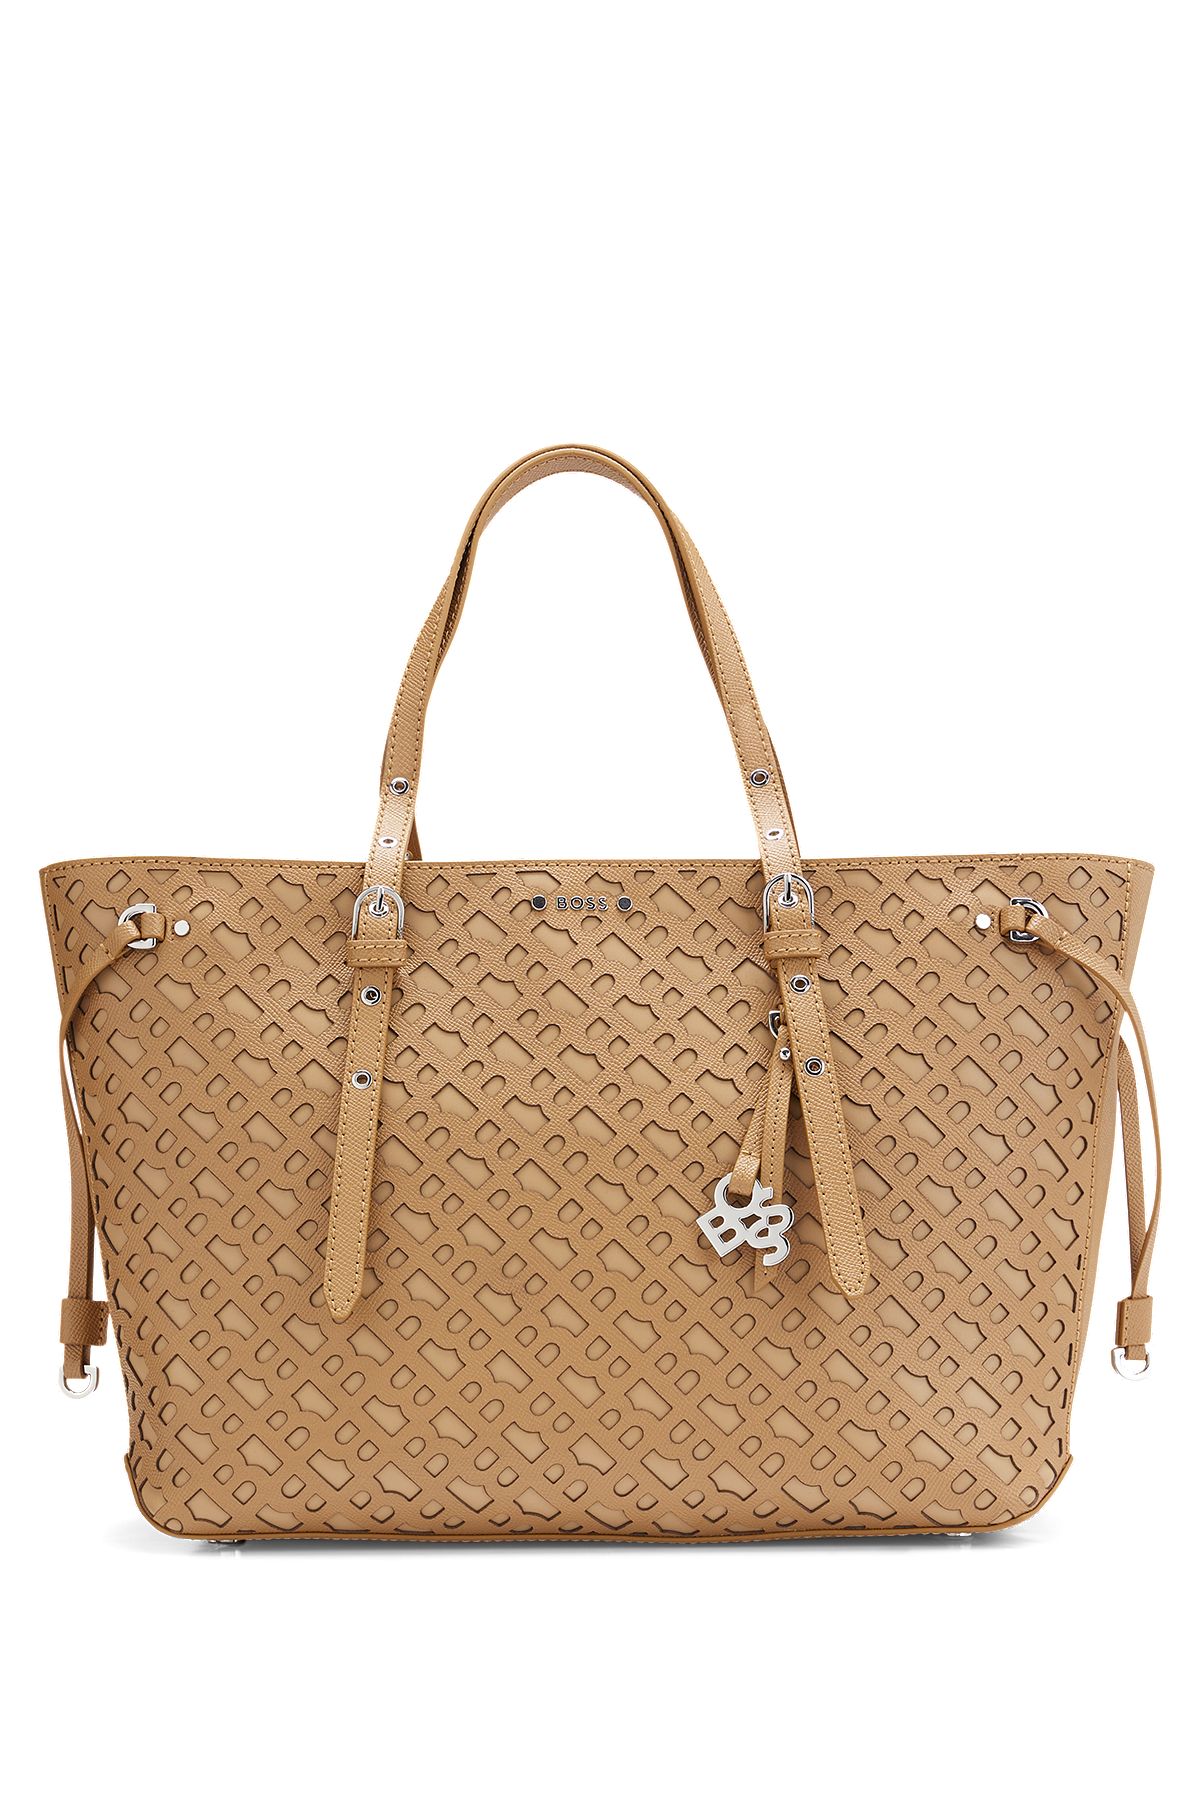 Shopper bag in grained leather with monogram pattern, Beige